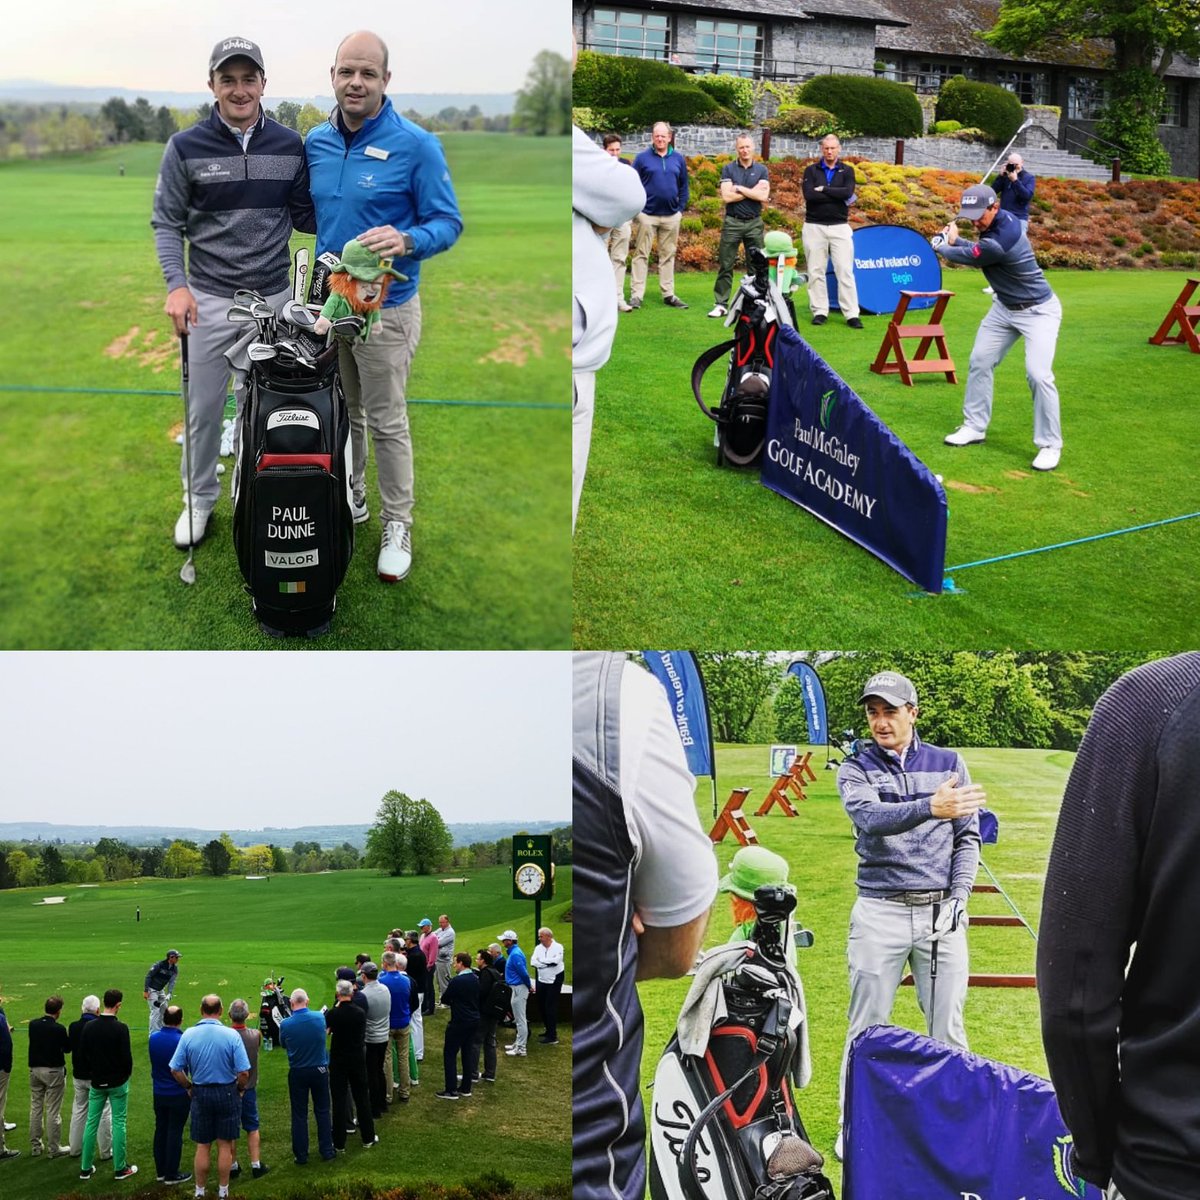 It was great to welcome @dunners11 to the @mcginleygolf Academy at @mountjuliet today for a @bankofireland Corporate Golf Event! #Golf #MountJulietGolf #MountJulietEstate #PaulMcGinleyGolfAcademy #GolfDigest #corporategolf #Learning #Kilkenny